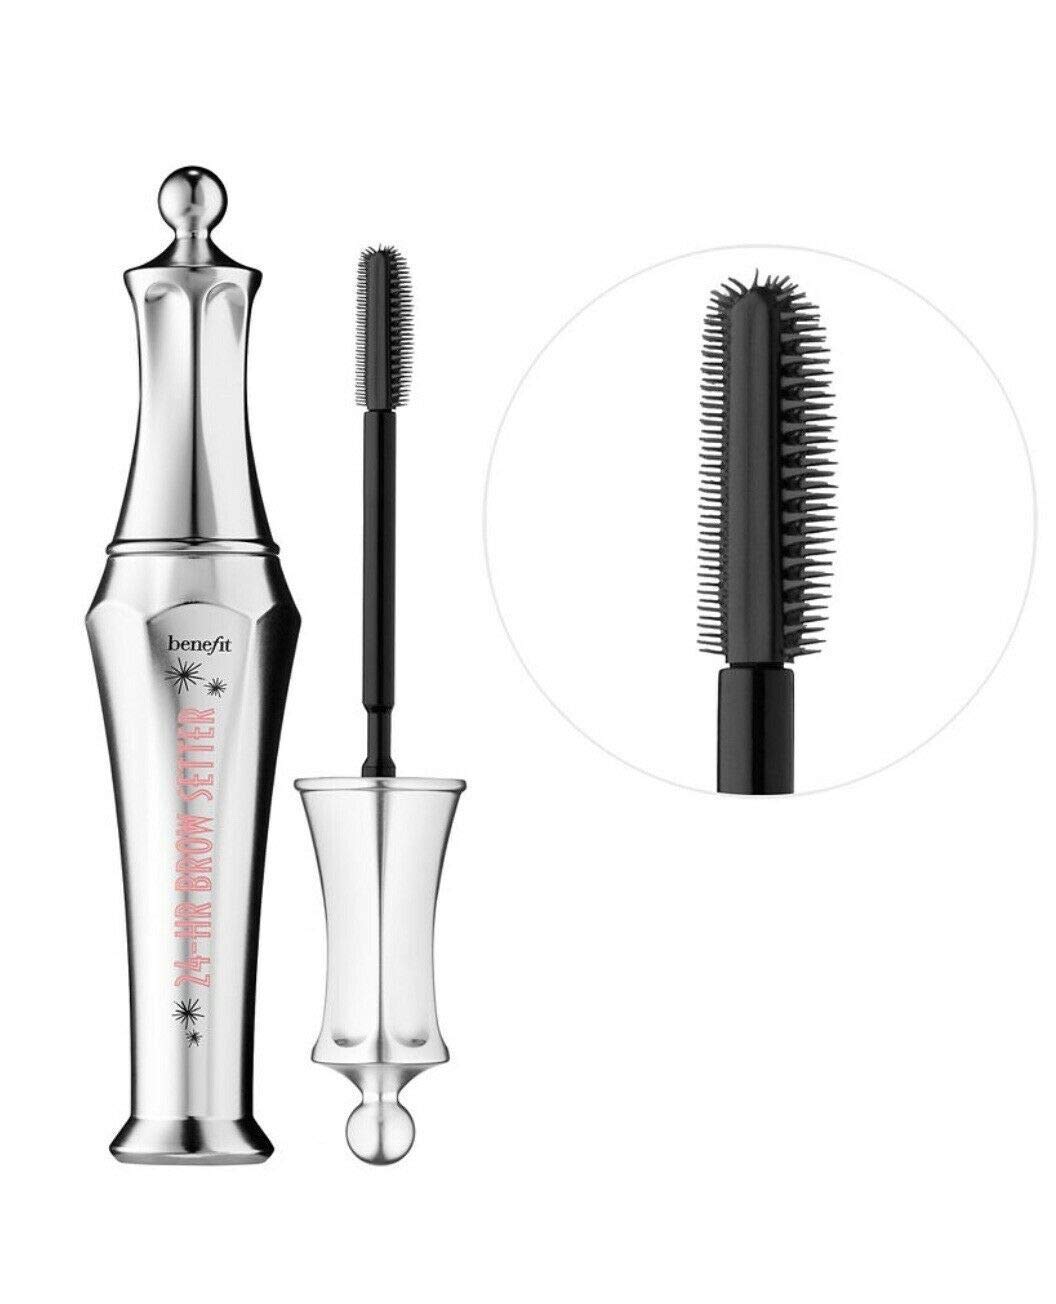 7mL Benefit 24-Hr Brow Setter Gel (Clear) $15 + Free Shipping w/ Prime or on $35+